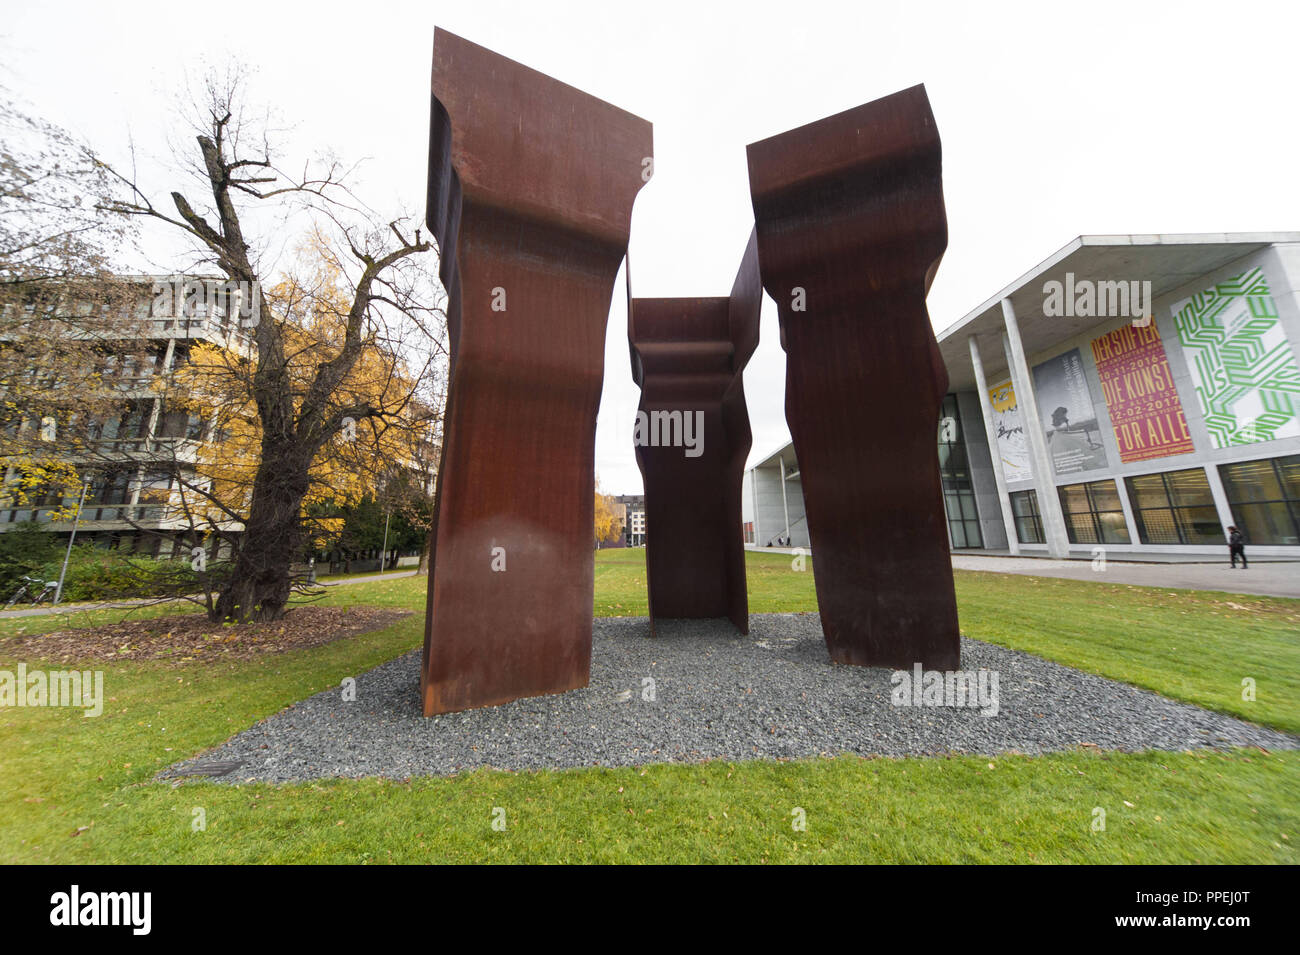 The sculpture Buscando la Luz (Searching the light) by the Basque sculptor Eduardo Chillida in front of the Pinakothek der Moderne (in the background on the right) on the Barer Strasse in Munich's museum quarter. Stock Photo